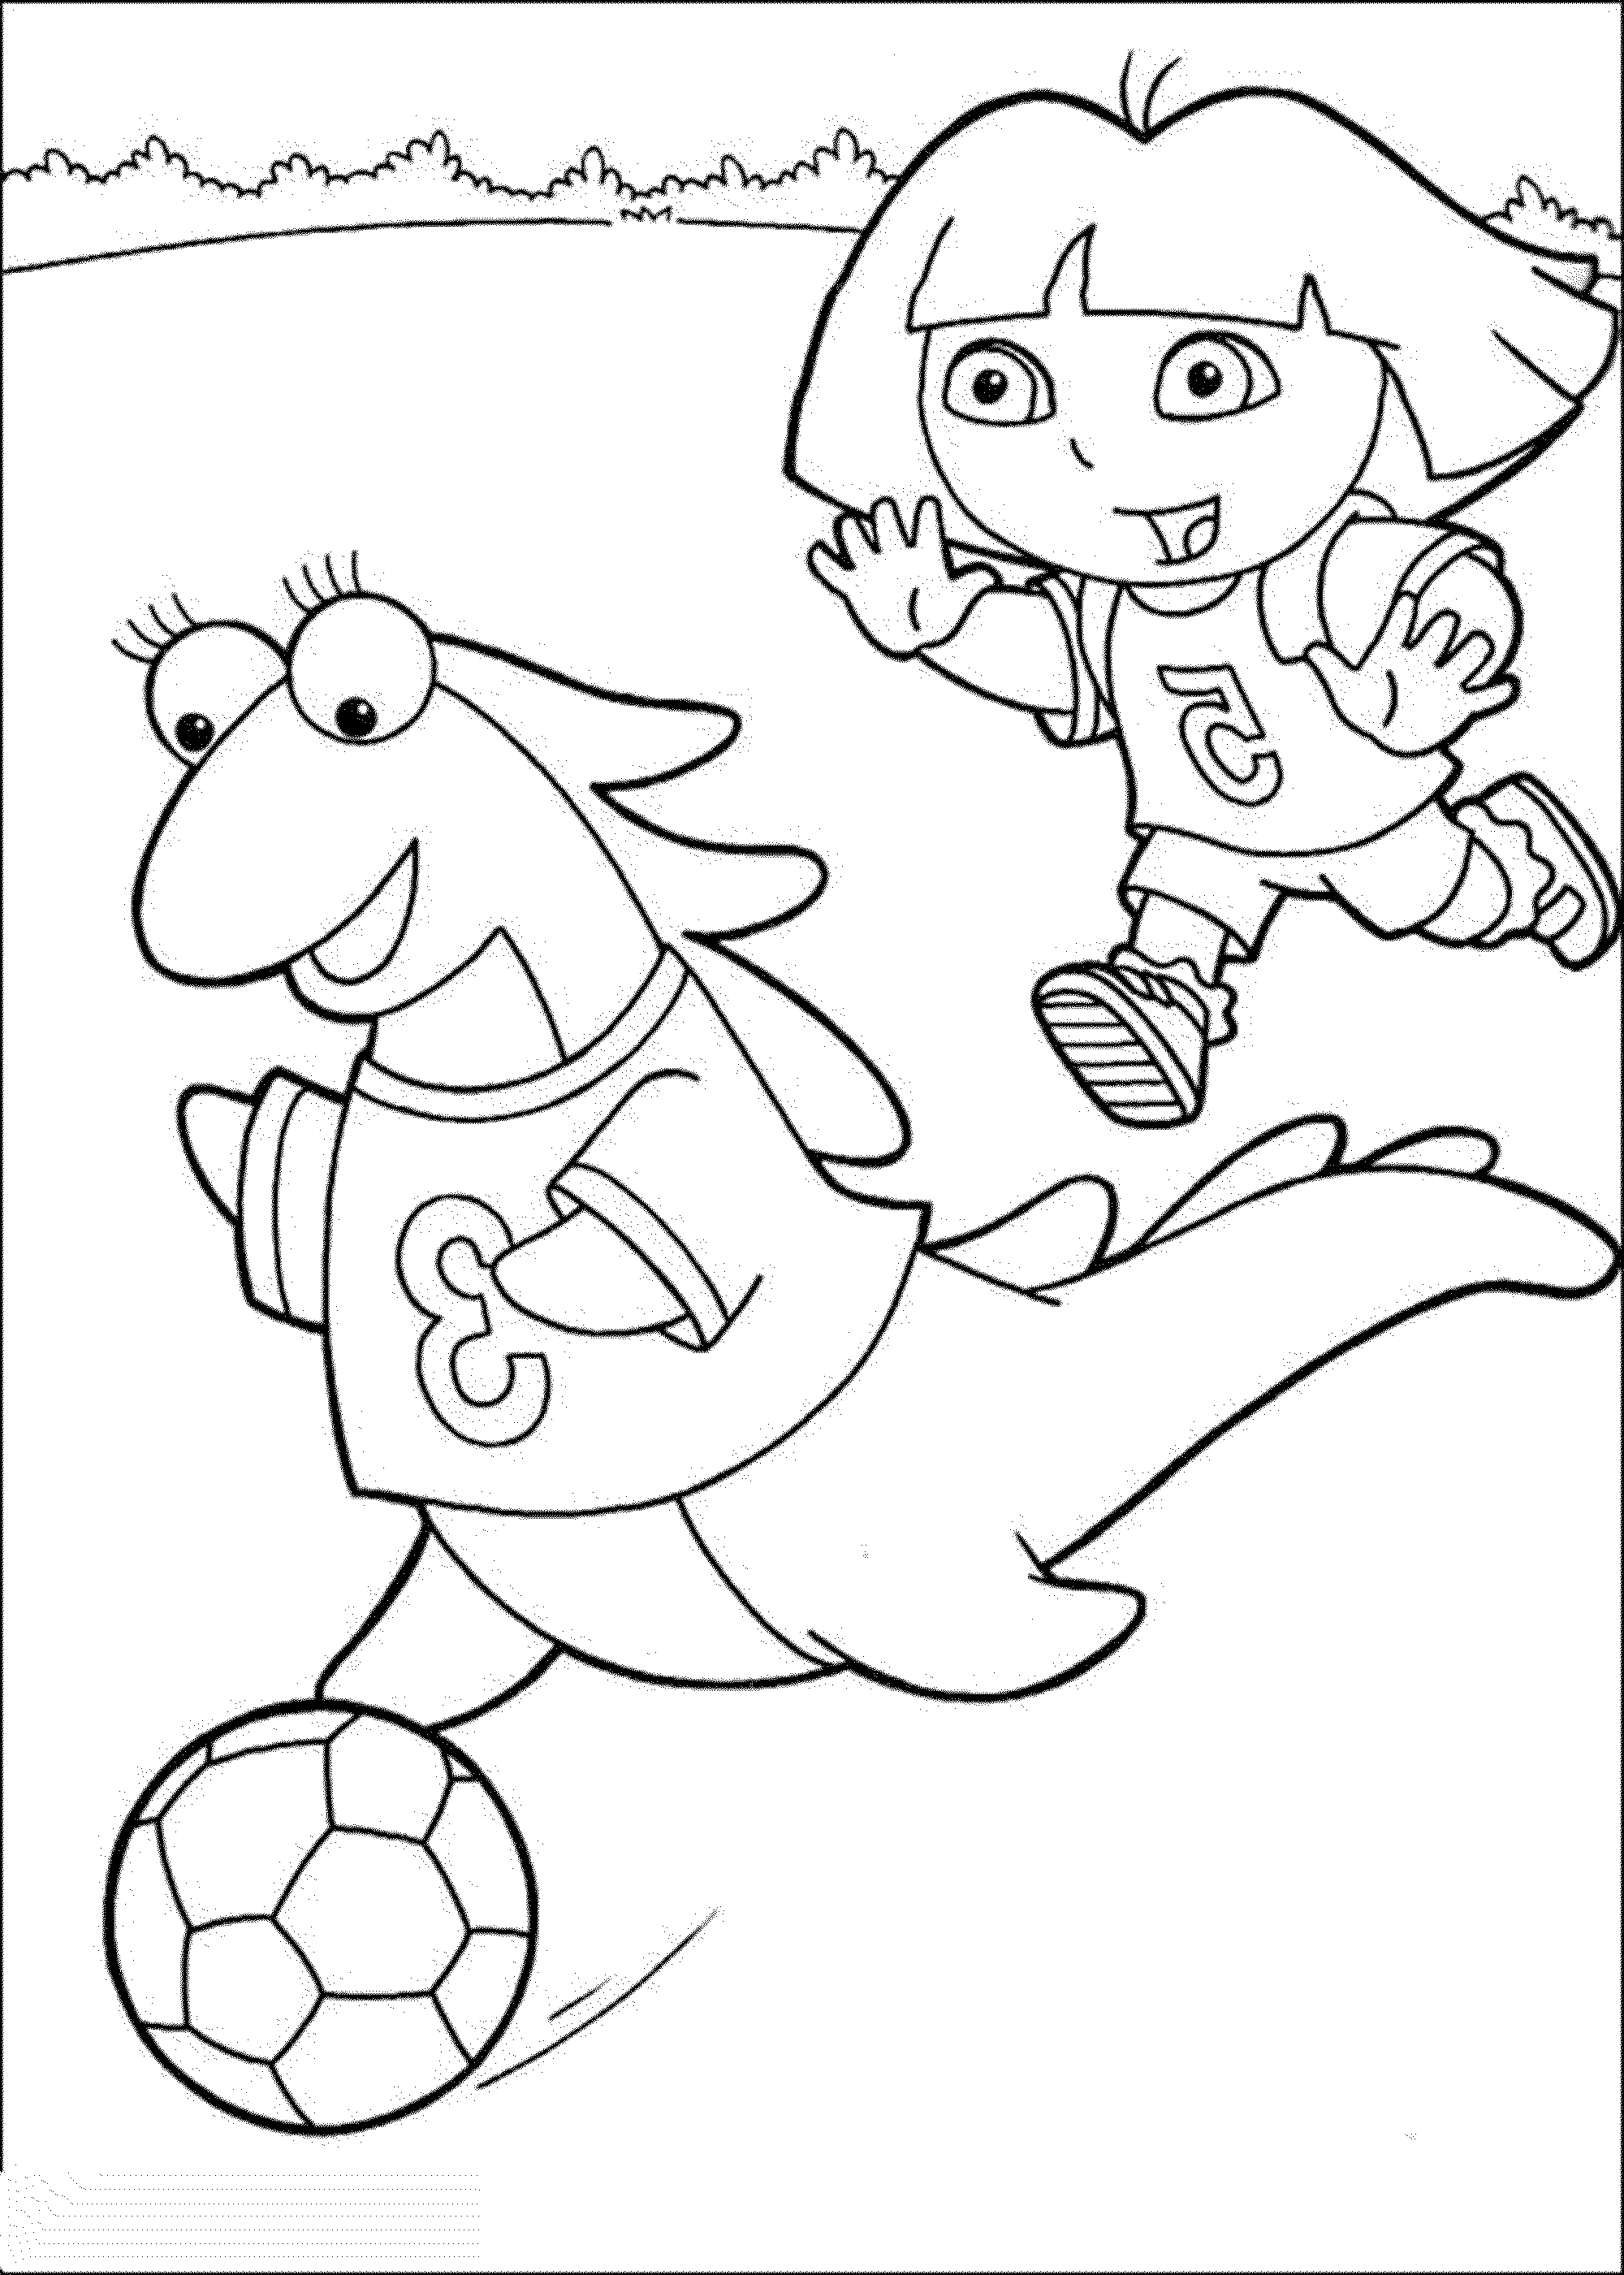 dora colouring page dora colouring page page dora colouring 